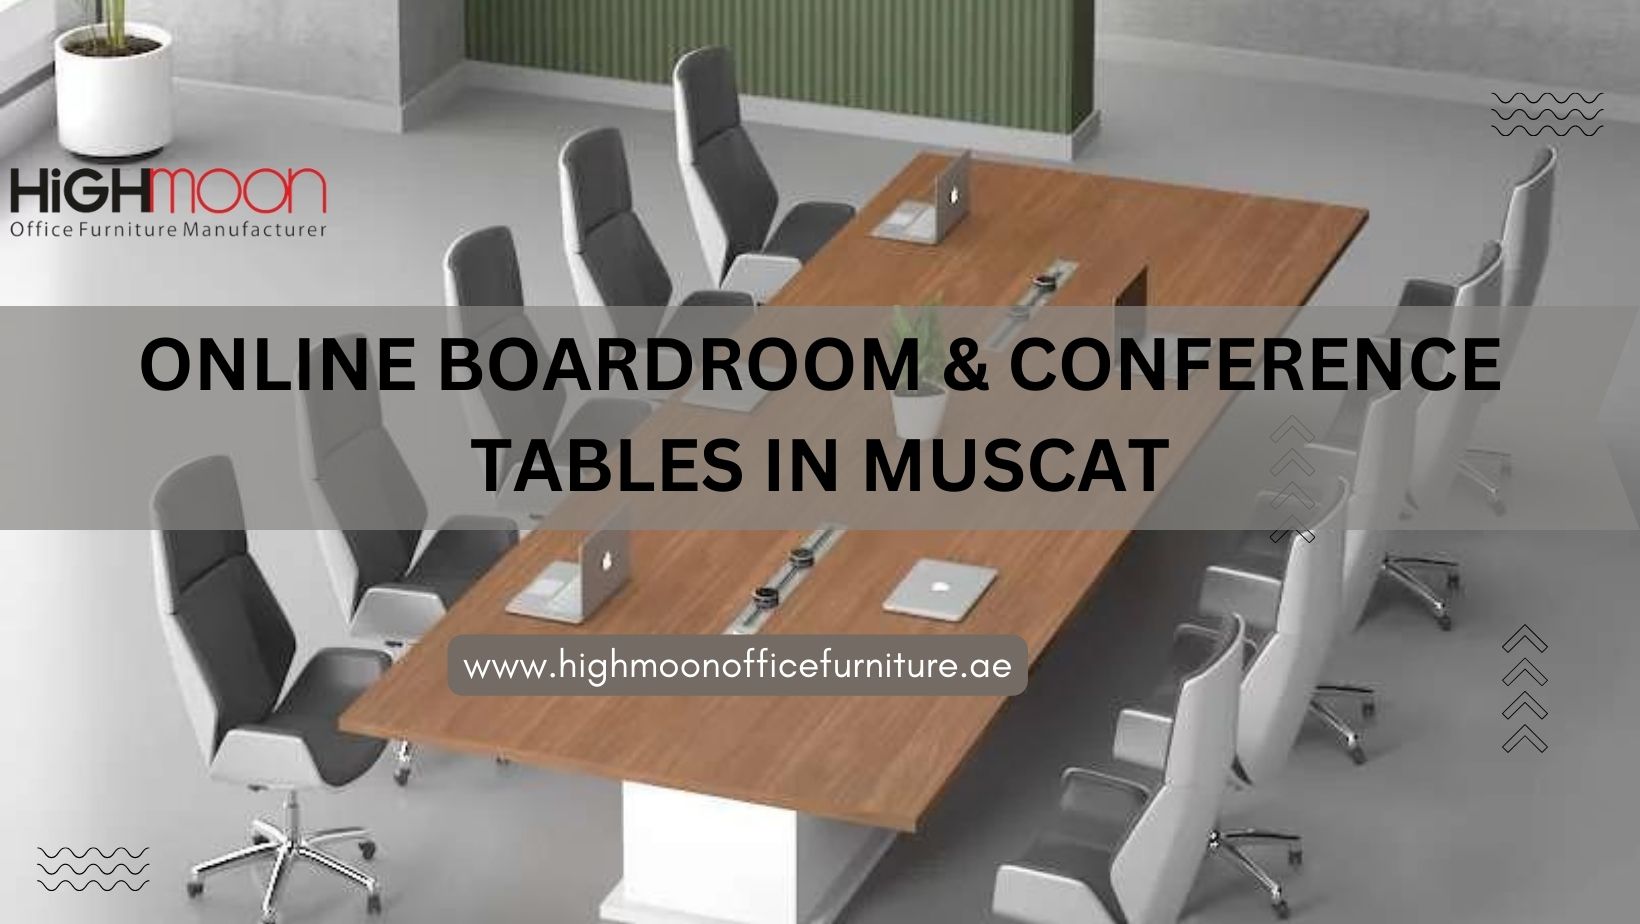 Online Boardroom & Conference Tables in Muscat